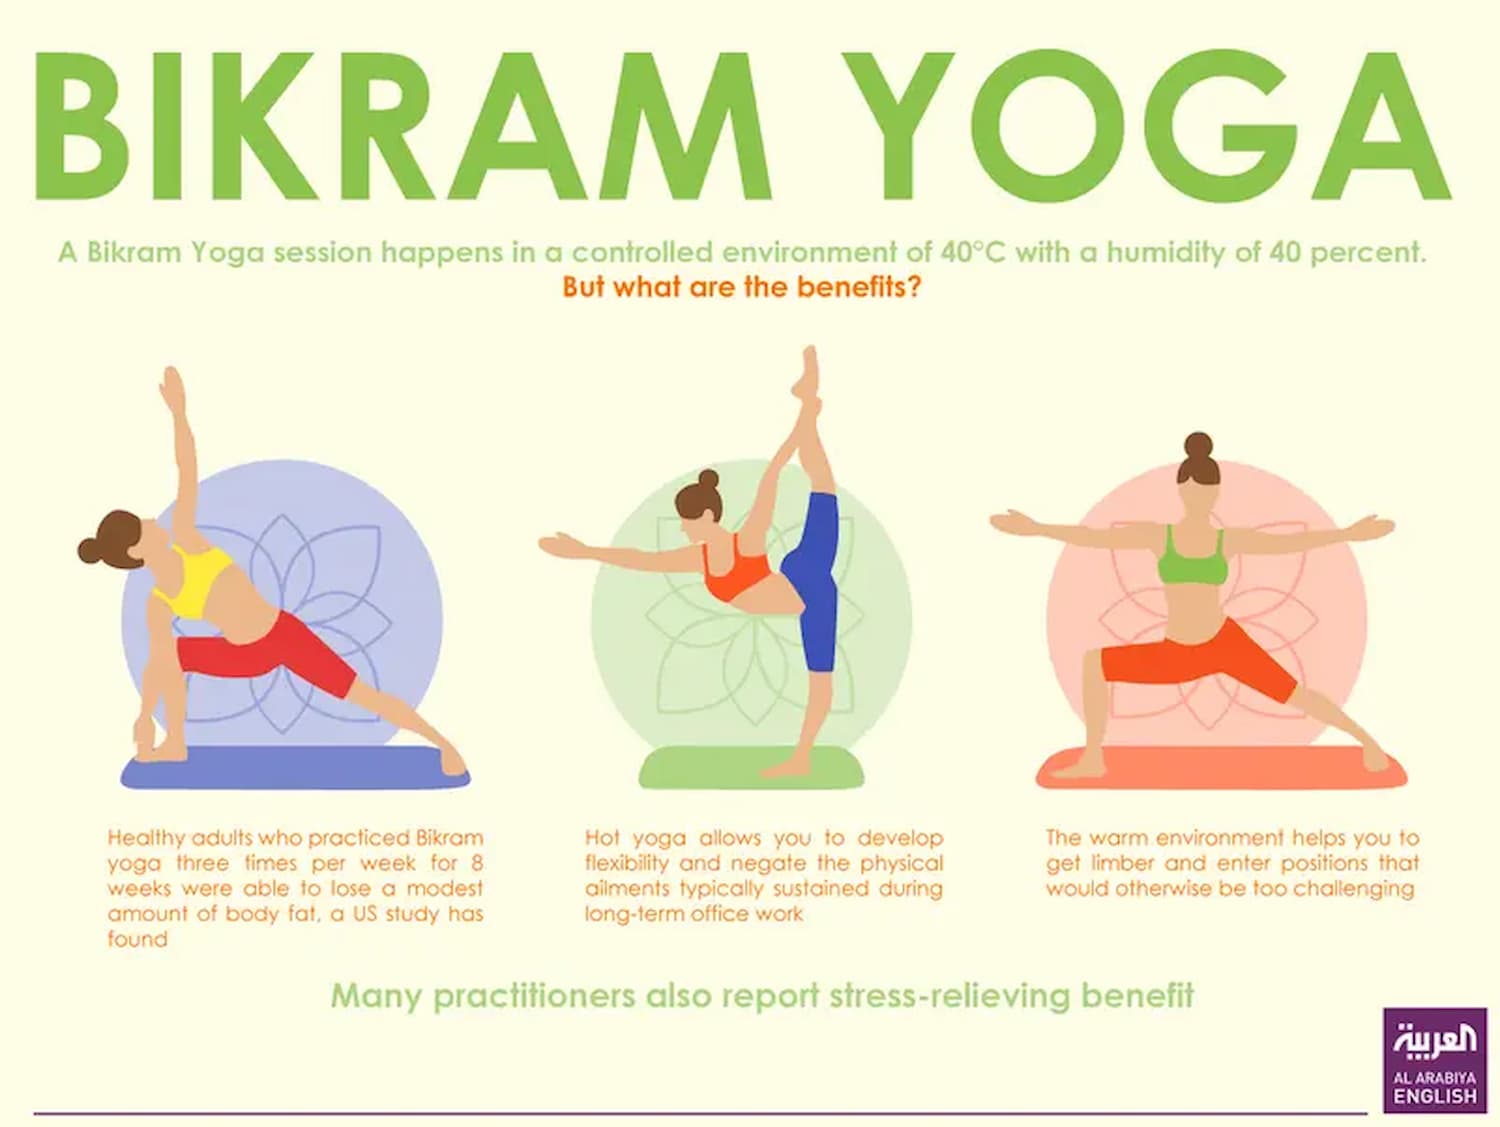 What postures are taught in Bikram yoga?